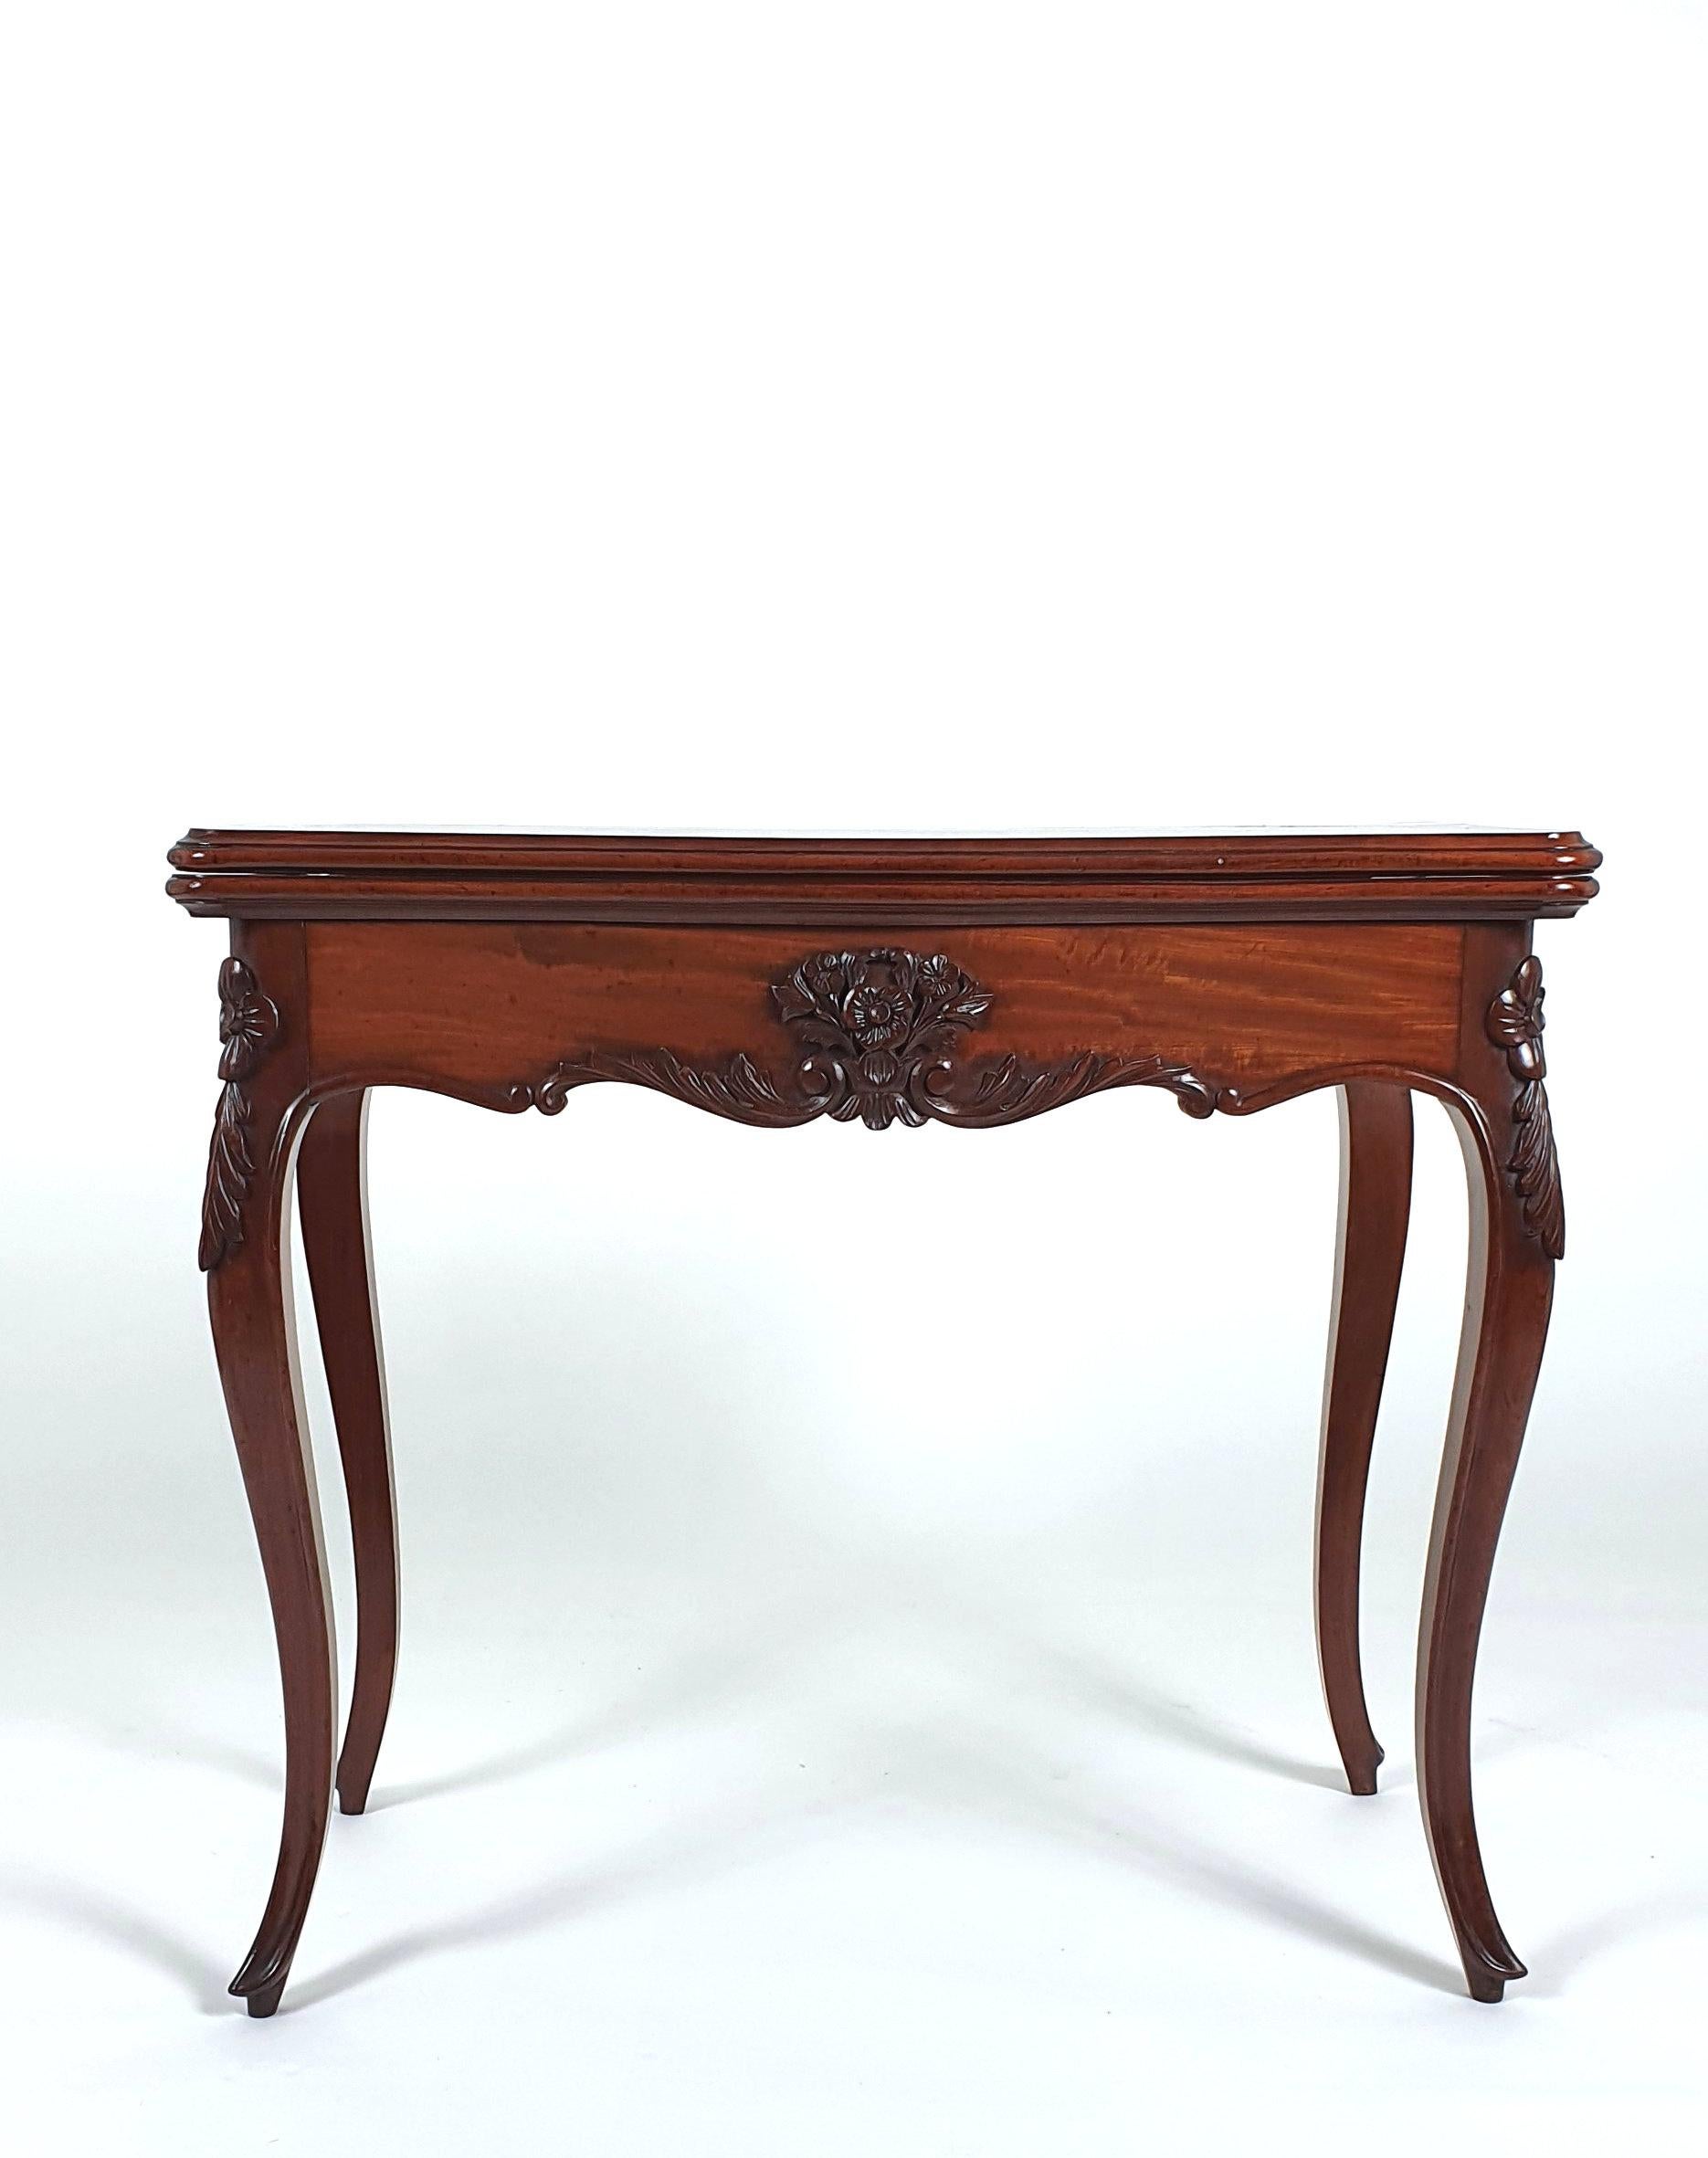 This elegant and very good looking 19th century French figured mahogany fold over card table stands on delicate cabriole leg supports with a carved floral decoration and a concertina action. The table has a green baize lined interior with a space